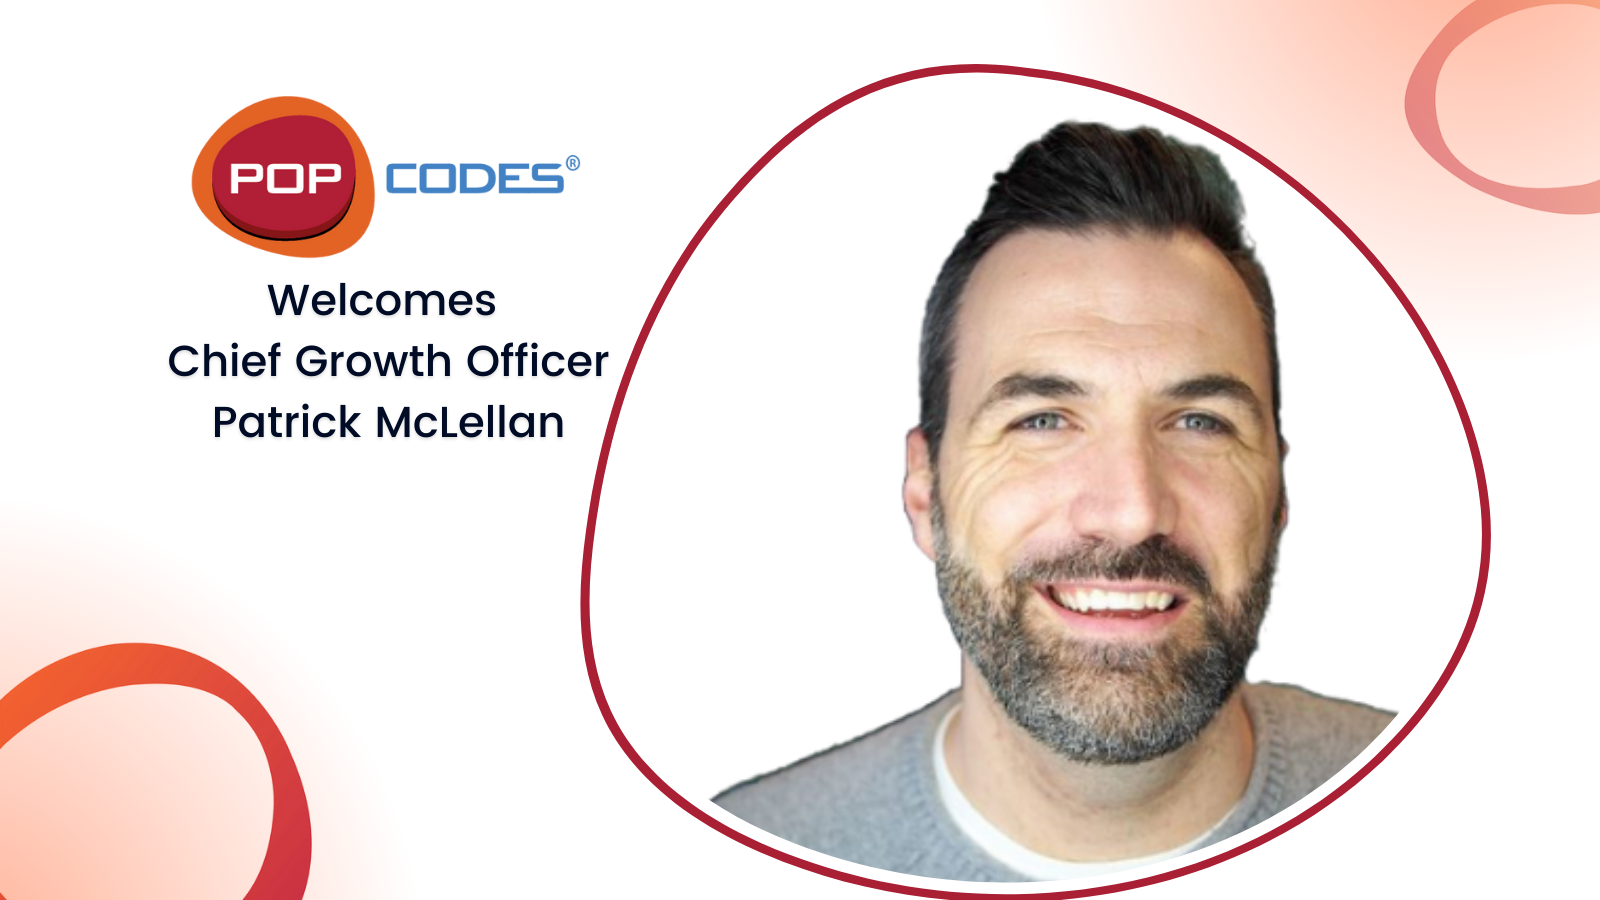 Photo of Patrick McLellan with text POPcodes Welcomes Chief Growth Officer Patrick McLellan